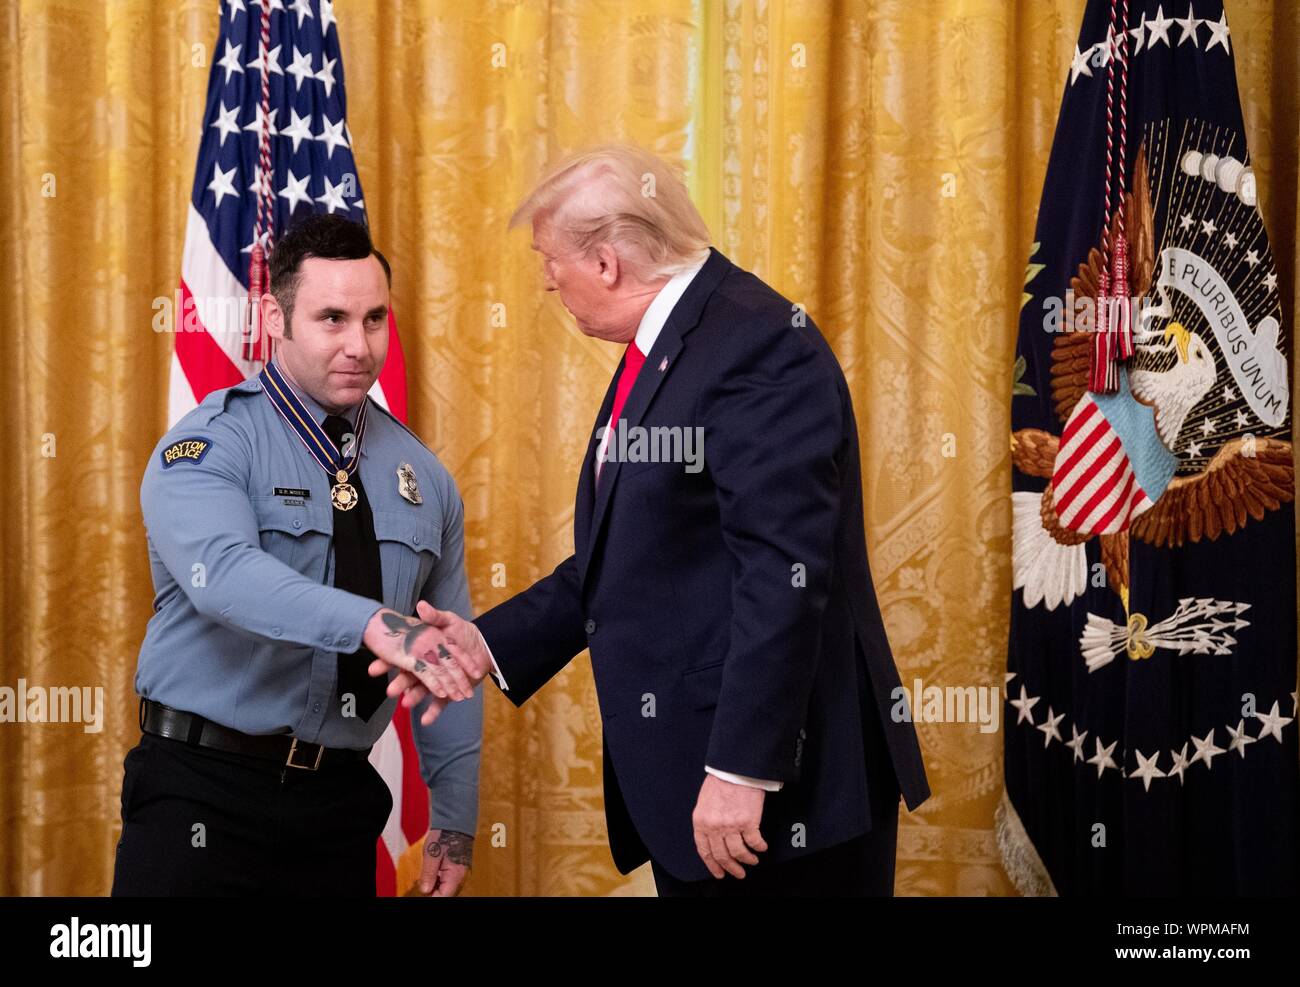 Washington, United States. 09th Sep, 2019. President Donald Trump awards Dayton Police Officer Ryan Nabel the Public Safety Officer Medal of Valor, during a ceremony in the East Room at the White House in Washington, DC on Monday, September 9, 2019. Trump recognized the six Dayton officers who stoped a mass shooting on August 4th and honored 5 civilians who helped during a mass shooting at a Walmart in El Paso a day before. Photo by Kevin Dietsch/UPI Credit: UPI/Alamy Live News Stock Photo